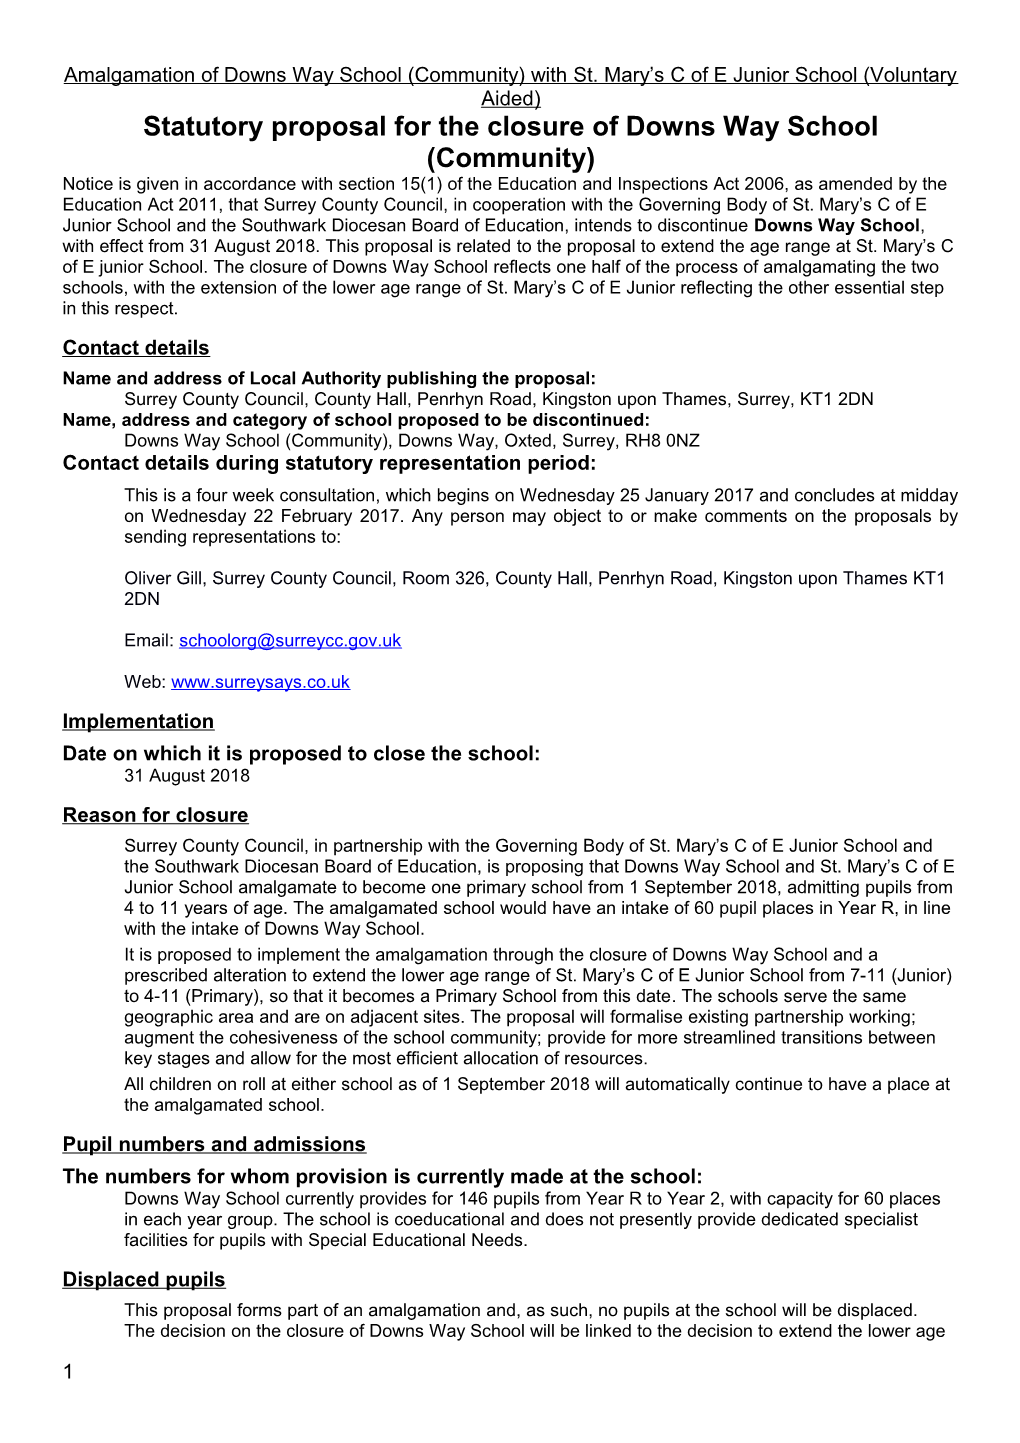 Statutory Proposal for the Closure of Downs Way School (Community)